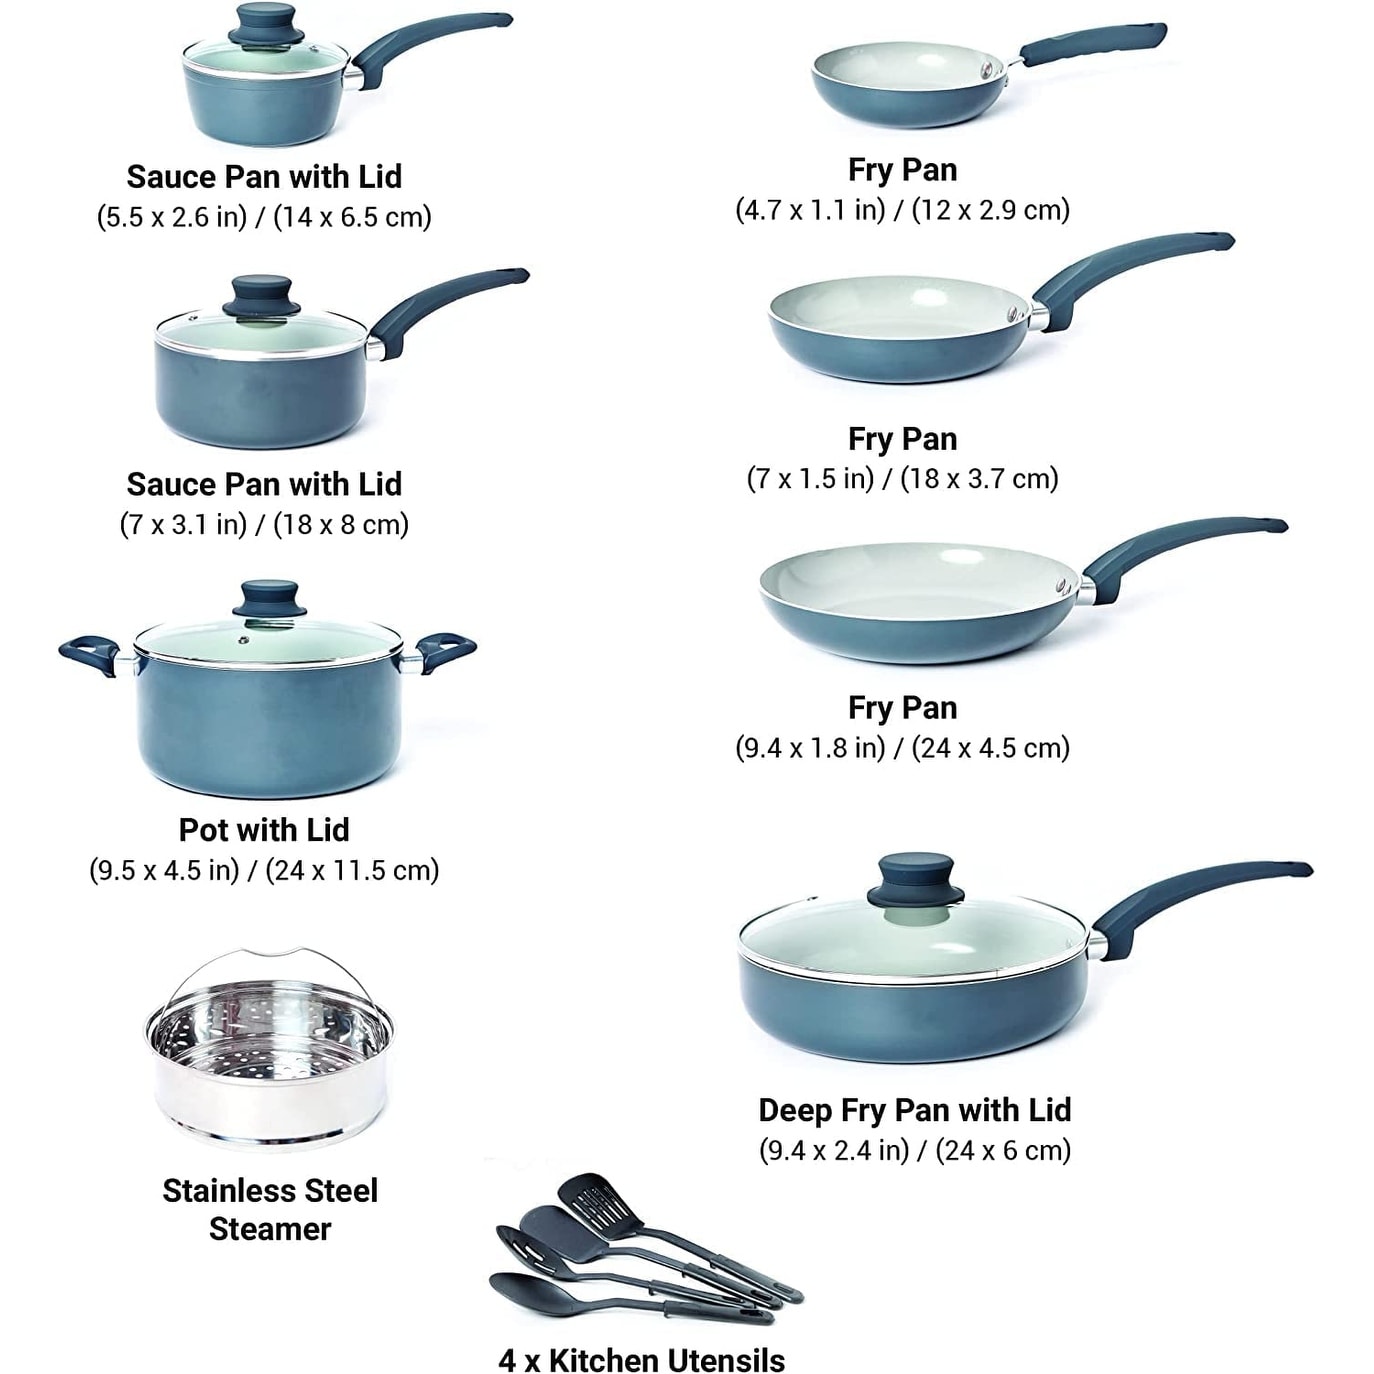 https://ak1.ostkcdn.com/images/products/is/images/direct/de93adb6a8cd0683afc09b7d2025d19be4b0ff01/Pots-and-Pans-Set-Nonstick-16-Piece-Healthy-Stone-Kitchen-Cookware-Sets.jpg